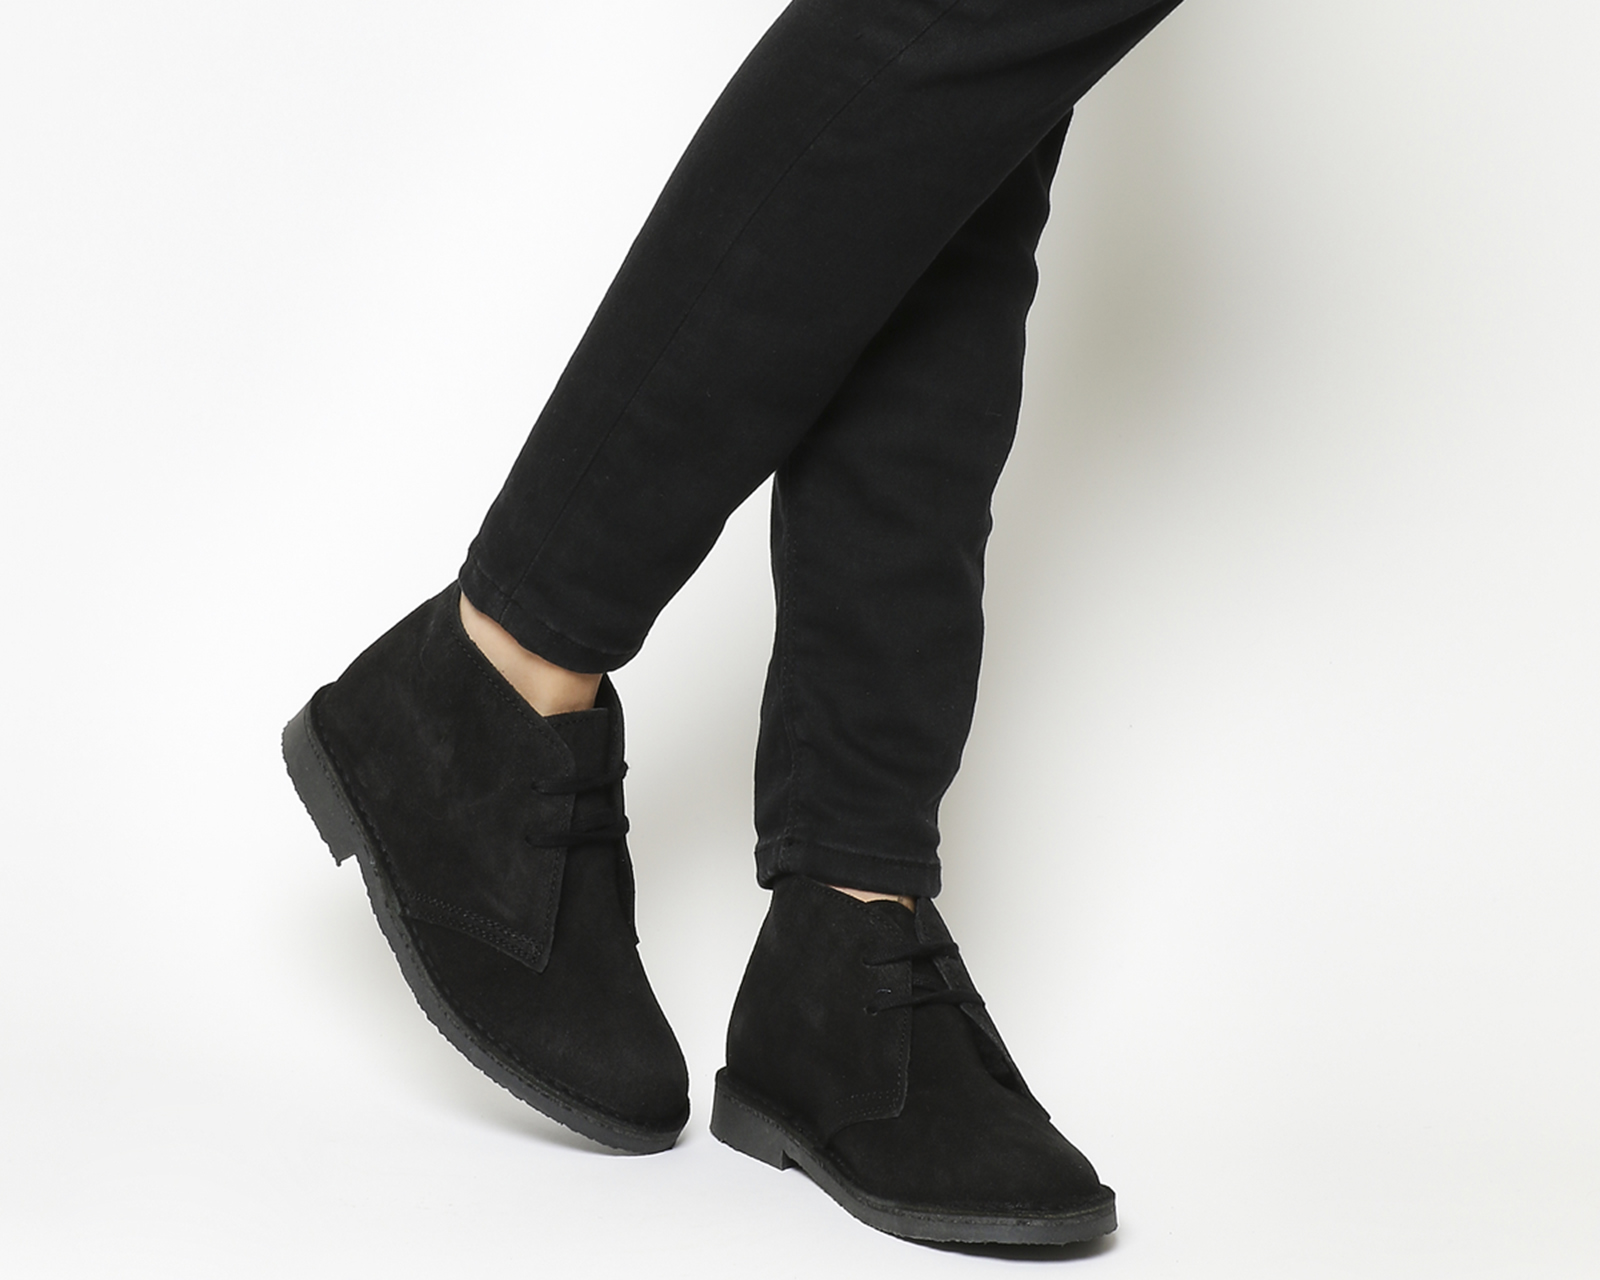 Office Uphill Desert Boots Black Suede Fur Ankle Boots